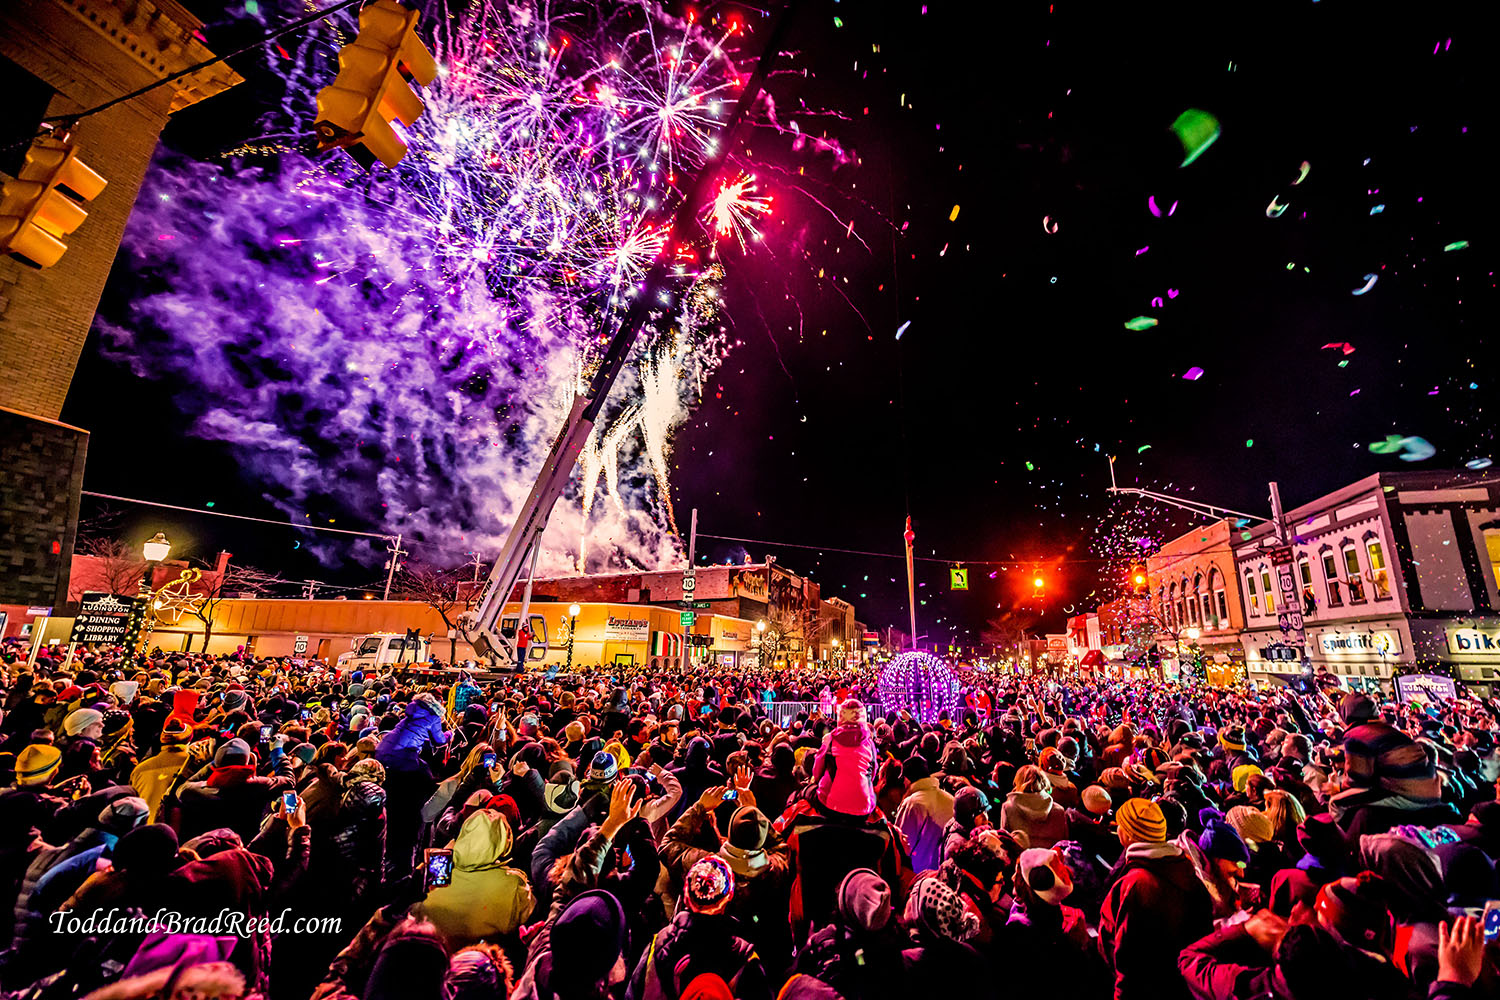 Todd Reed_0763_Ludington Celebrates 2017_Ball drop in downtown Ludington_1_01_2017_1500px_Website Watermarked.jpg